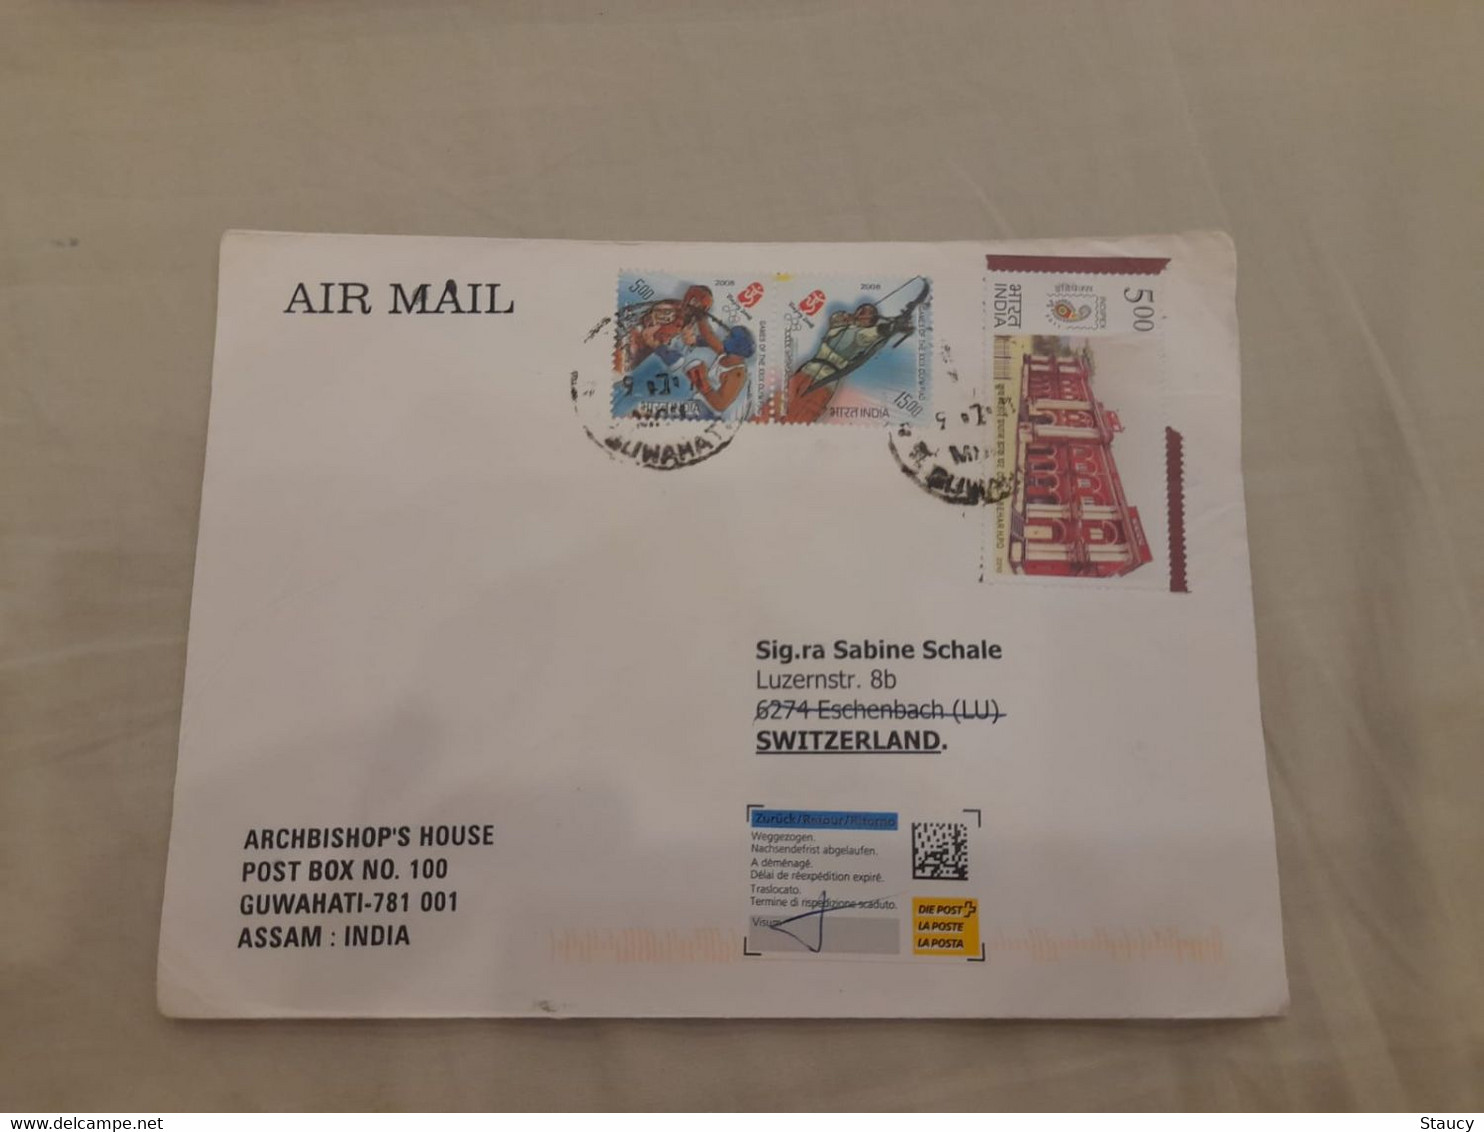 INDIA,2011,RETURN TO SENDER LABEL,AIR MAIL COVER TO SWITZERLAND,3 STAMPS,OLYMPIAD, POSTAL HERITAGE, GUWAHATI - Airmail